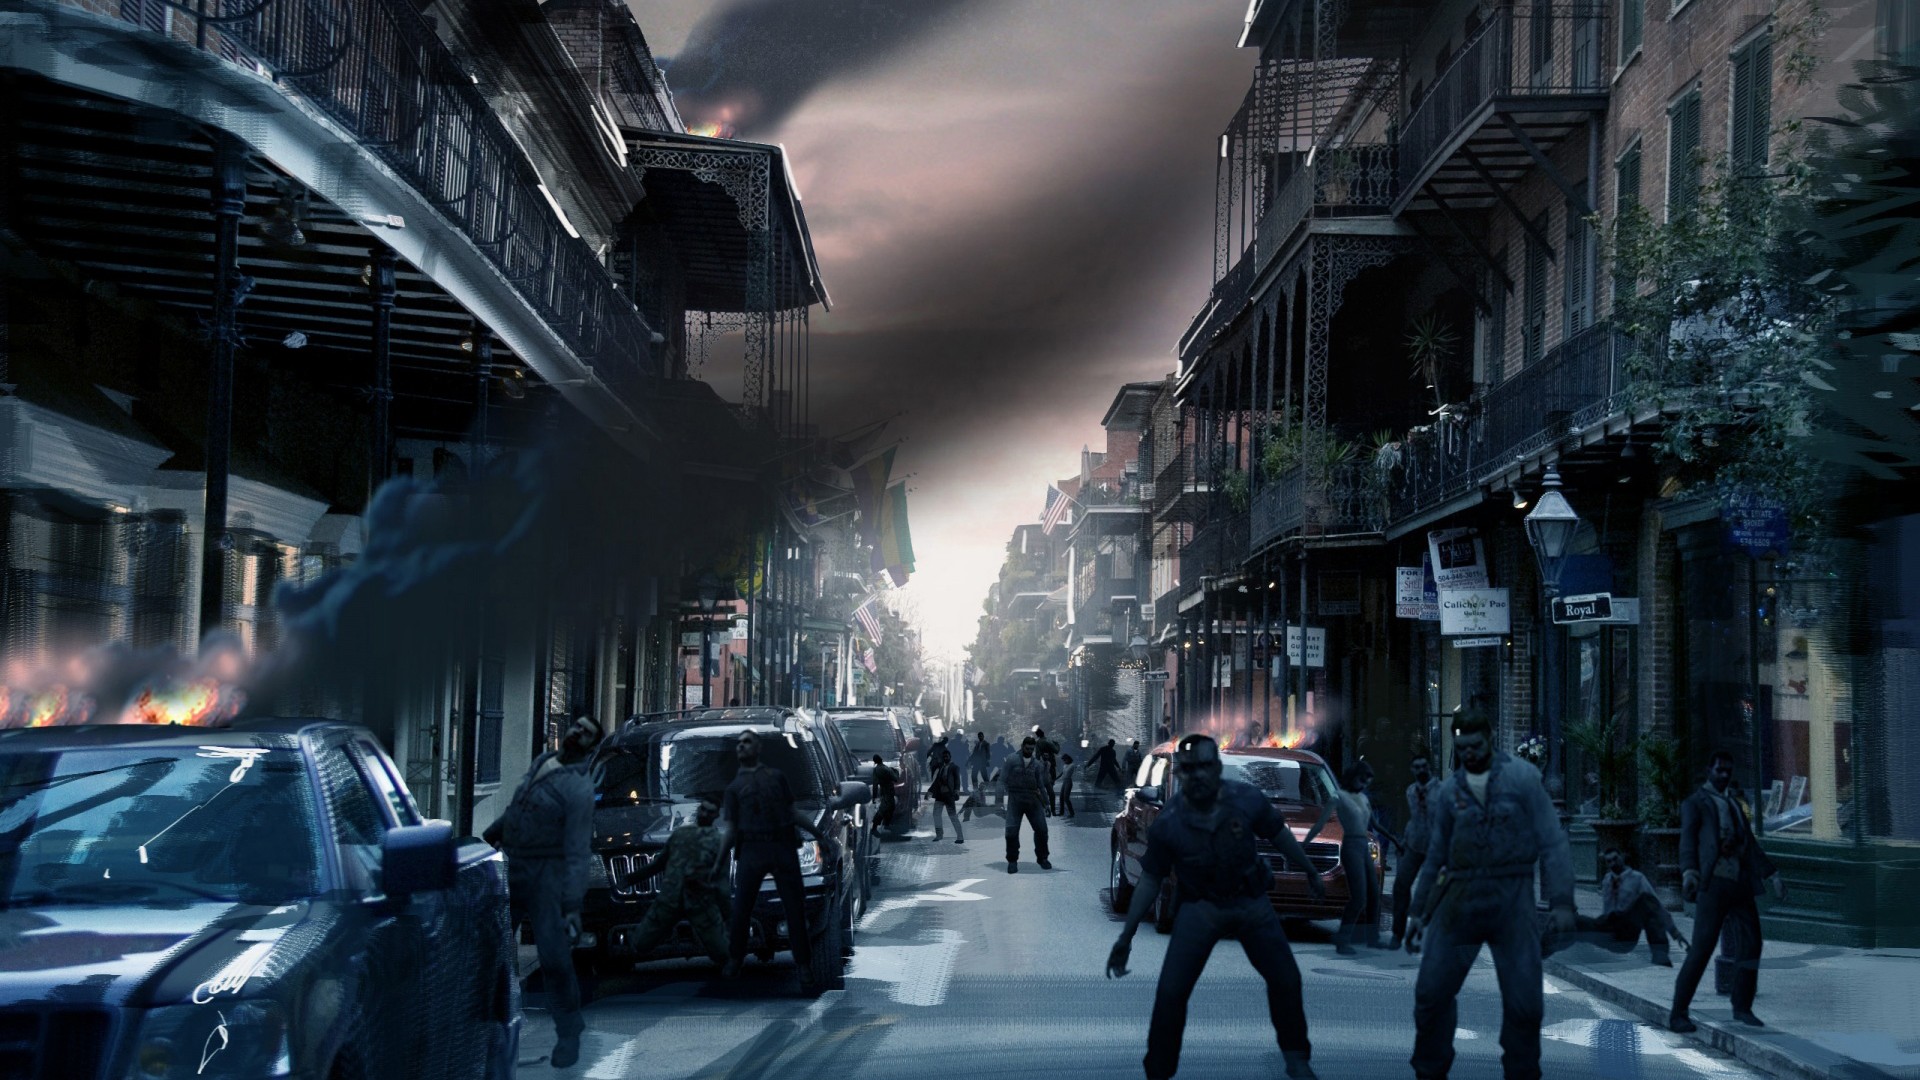 General 1920x1080 digital art cityscape undead apocalyptic zombies horror street fire burning